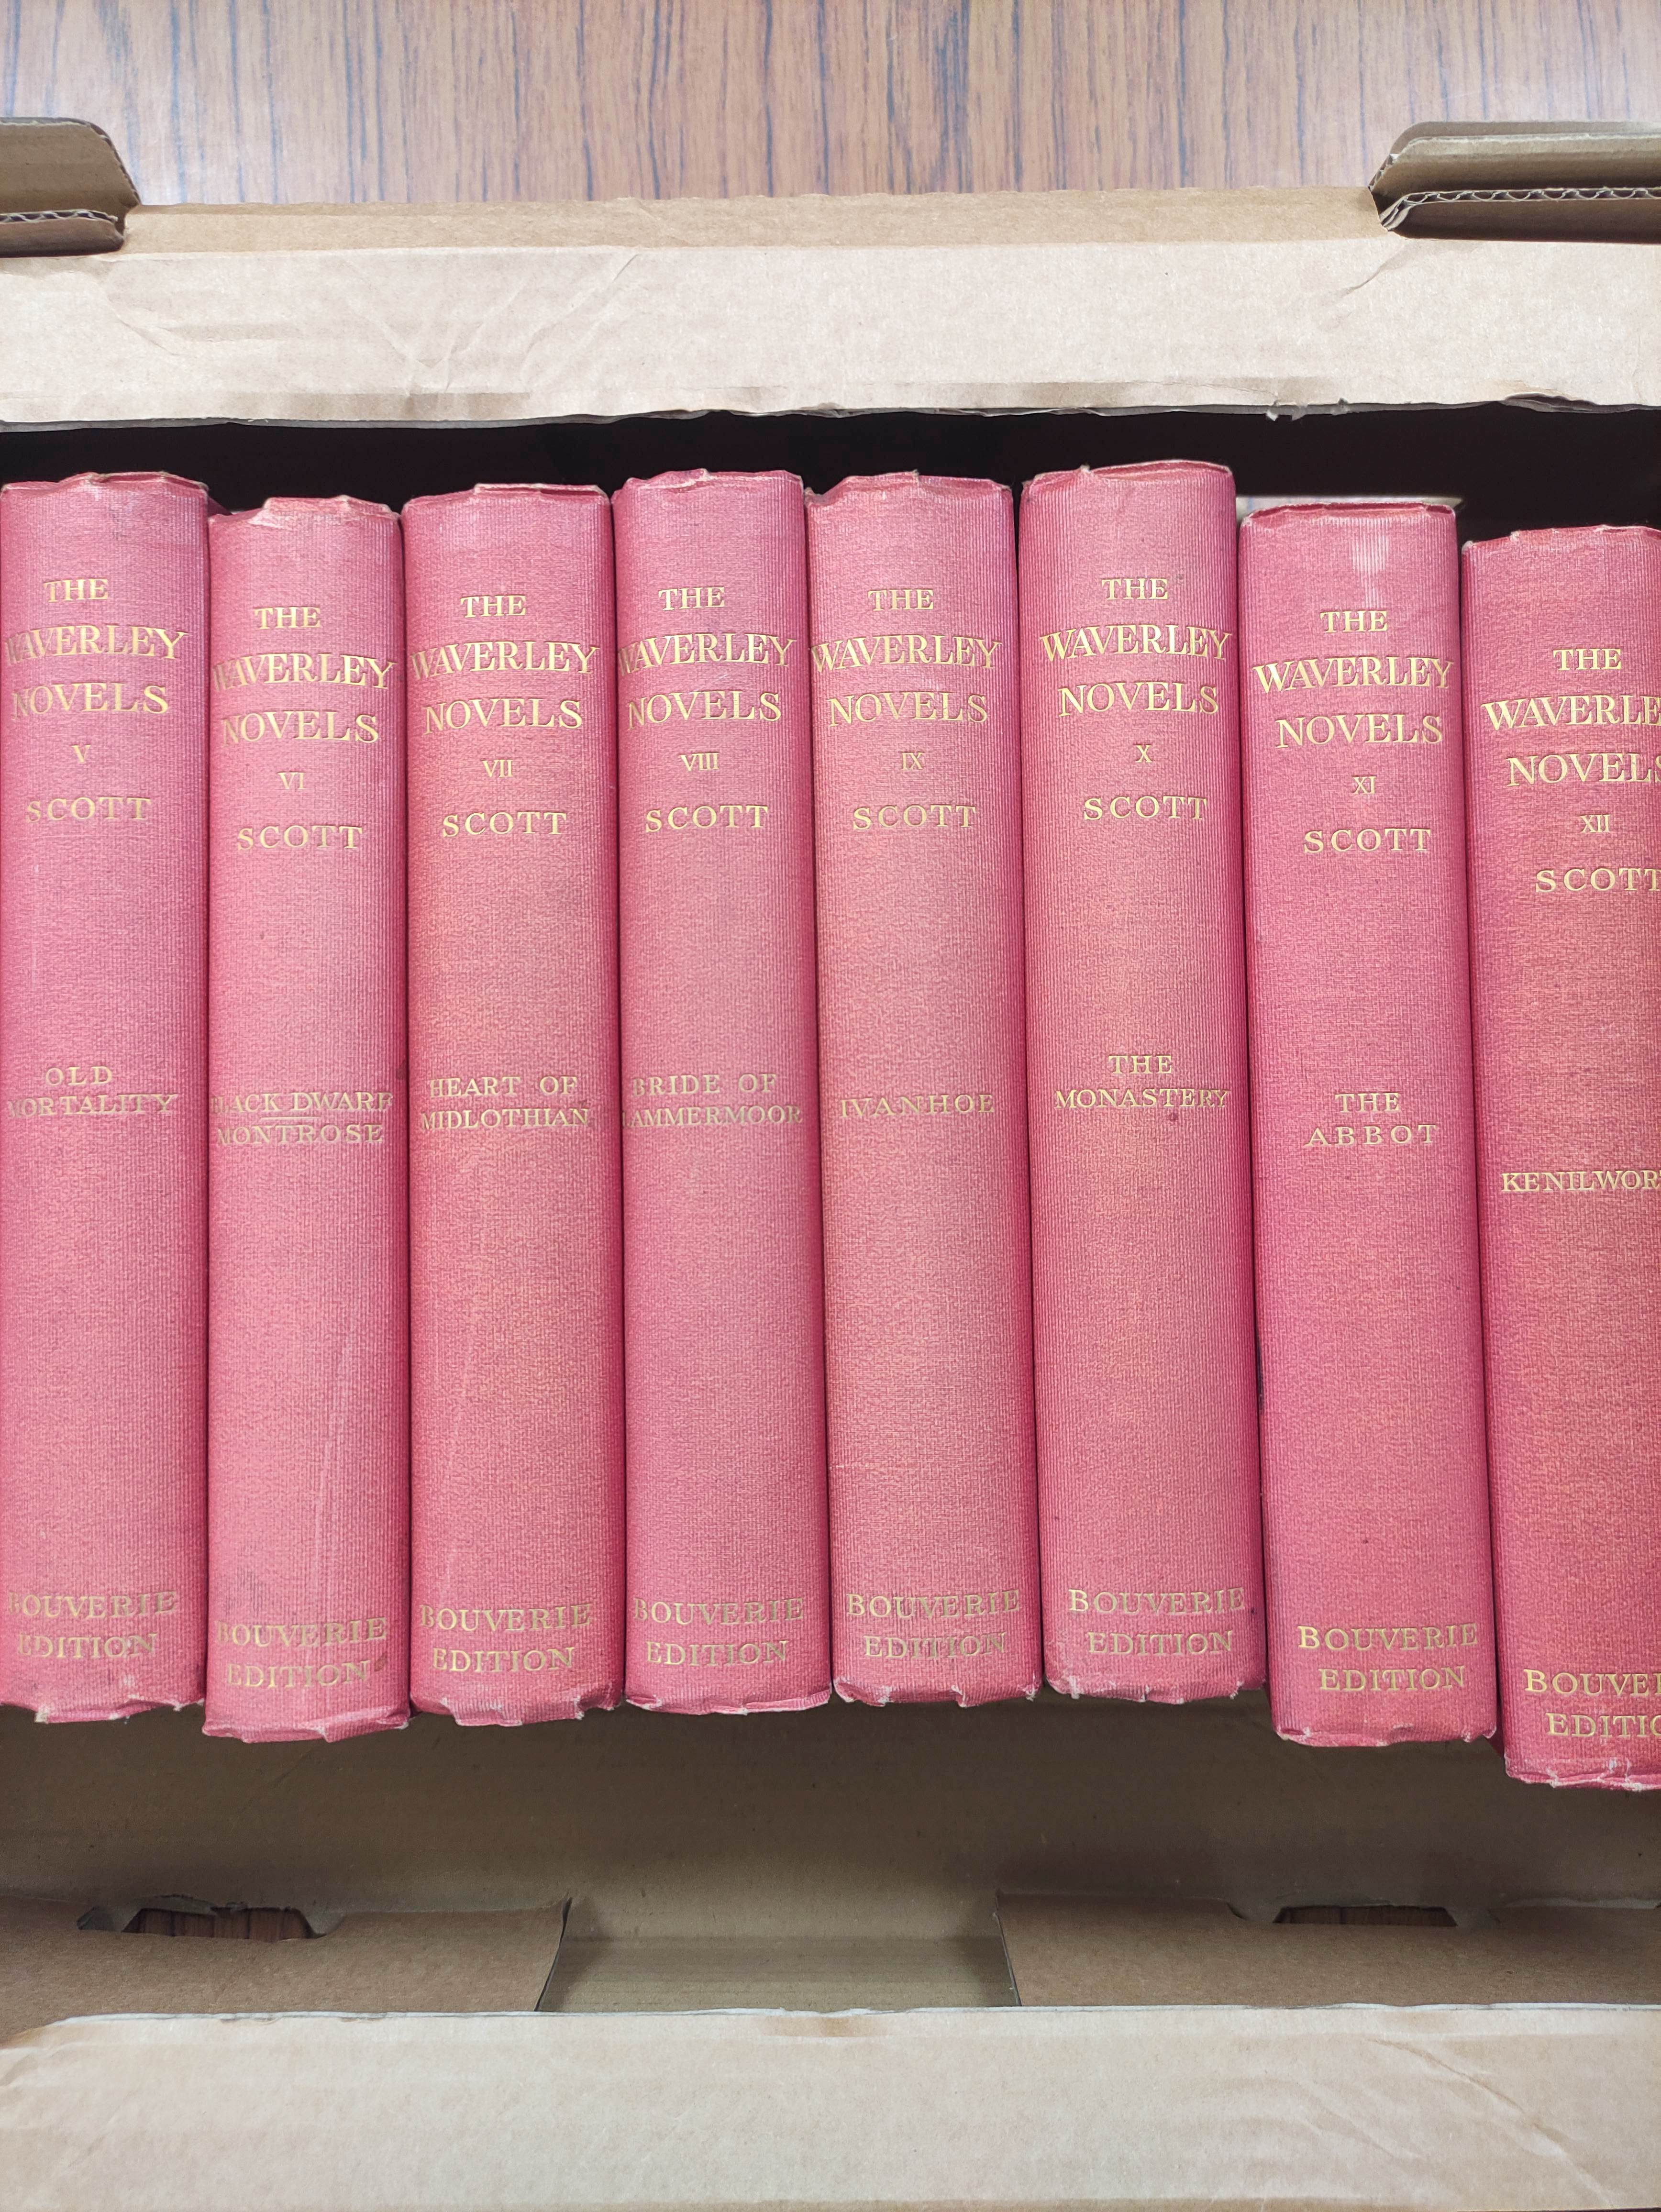 SCOTT SIR WALTER.  The Waverley Novels. The set of 25 vols. Frontis & eng. titles. Red cloth, a good - Image 5 of 13